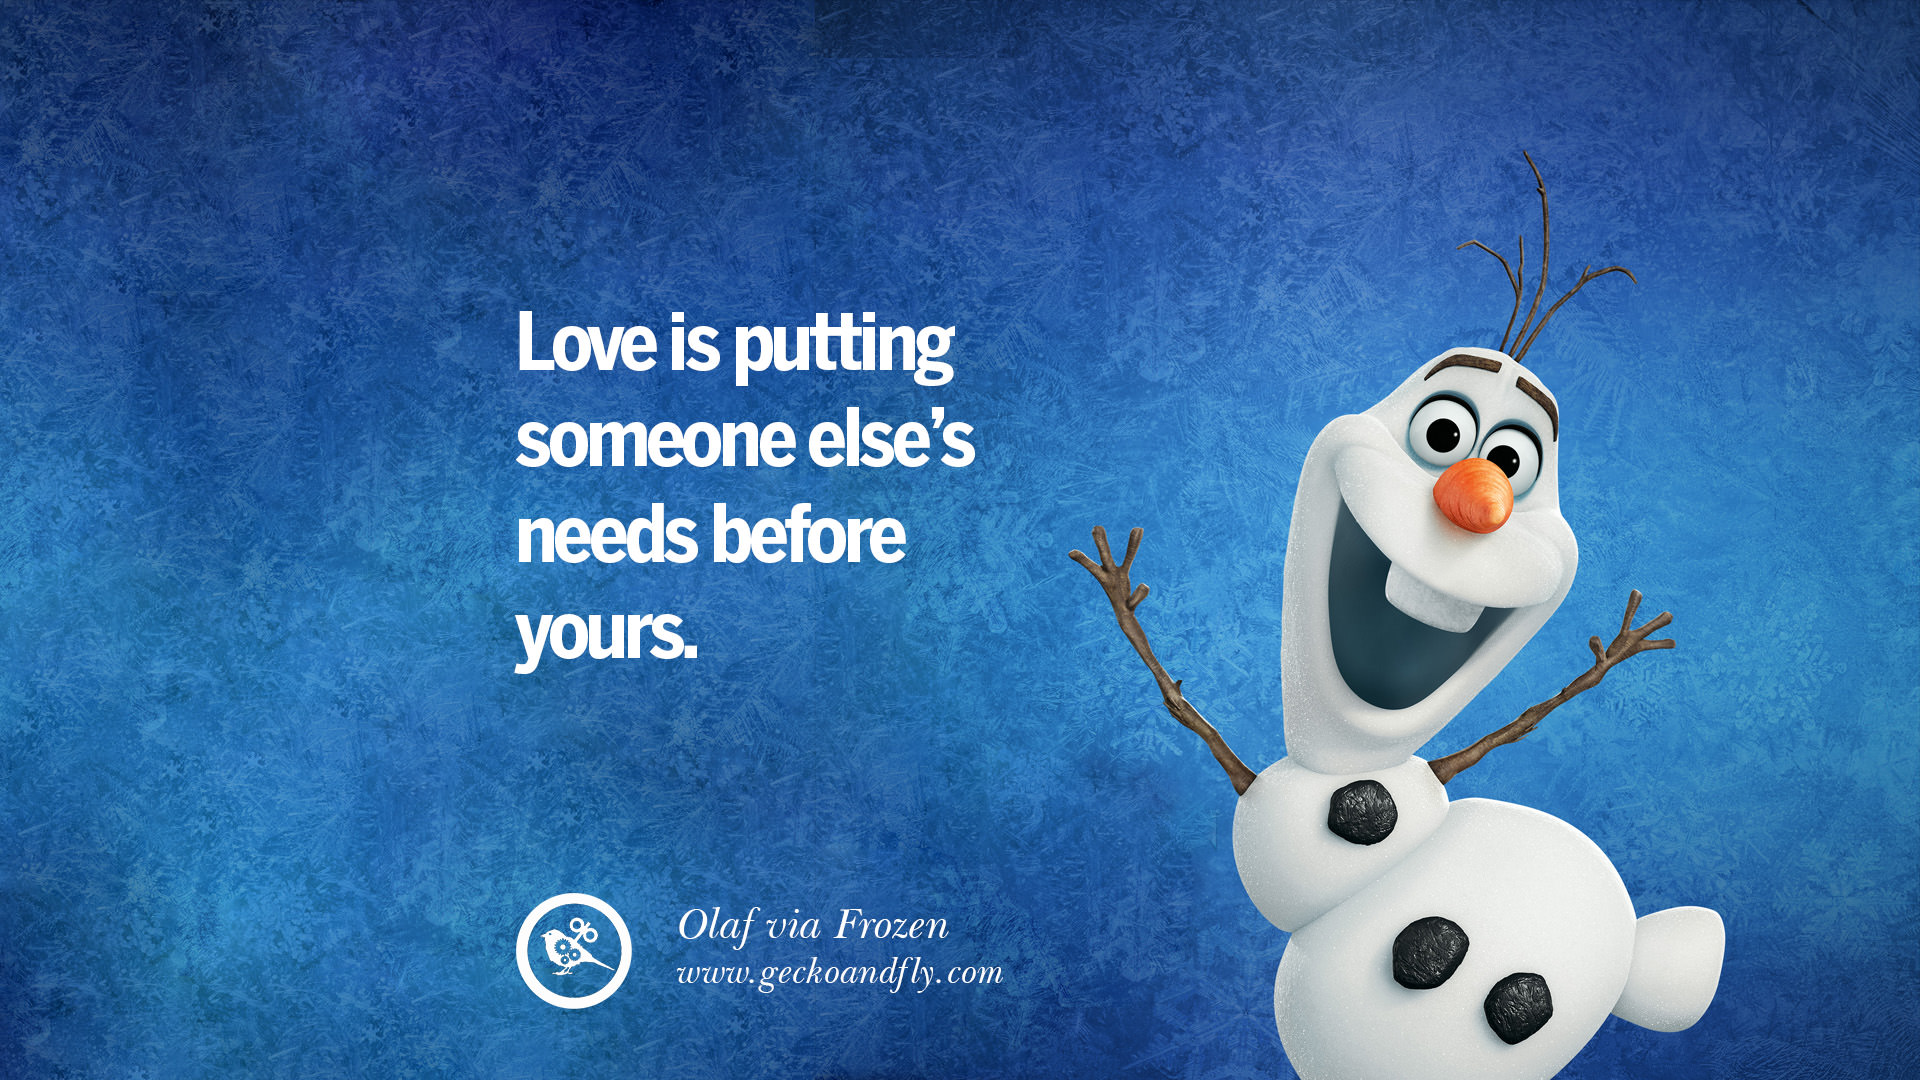 35 Inspiring Quotes From Disney's Animations [ Video & Wallpaper ]